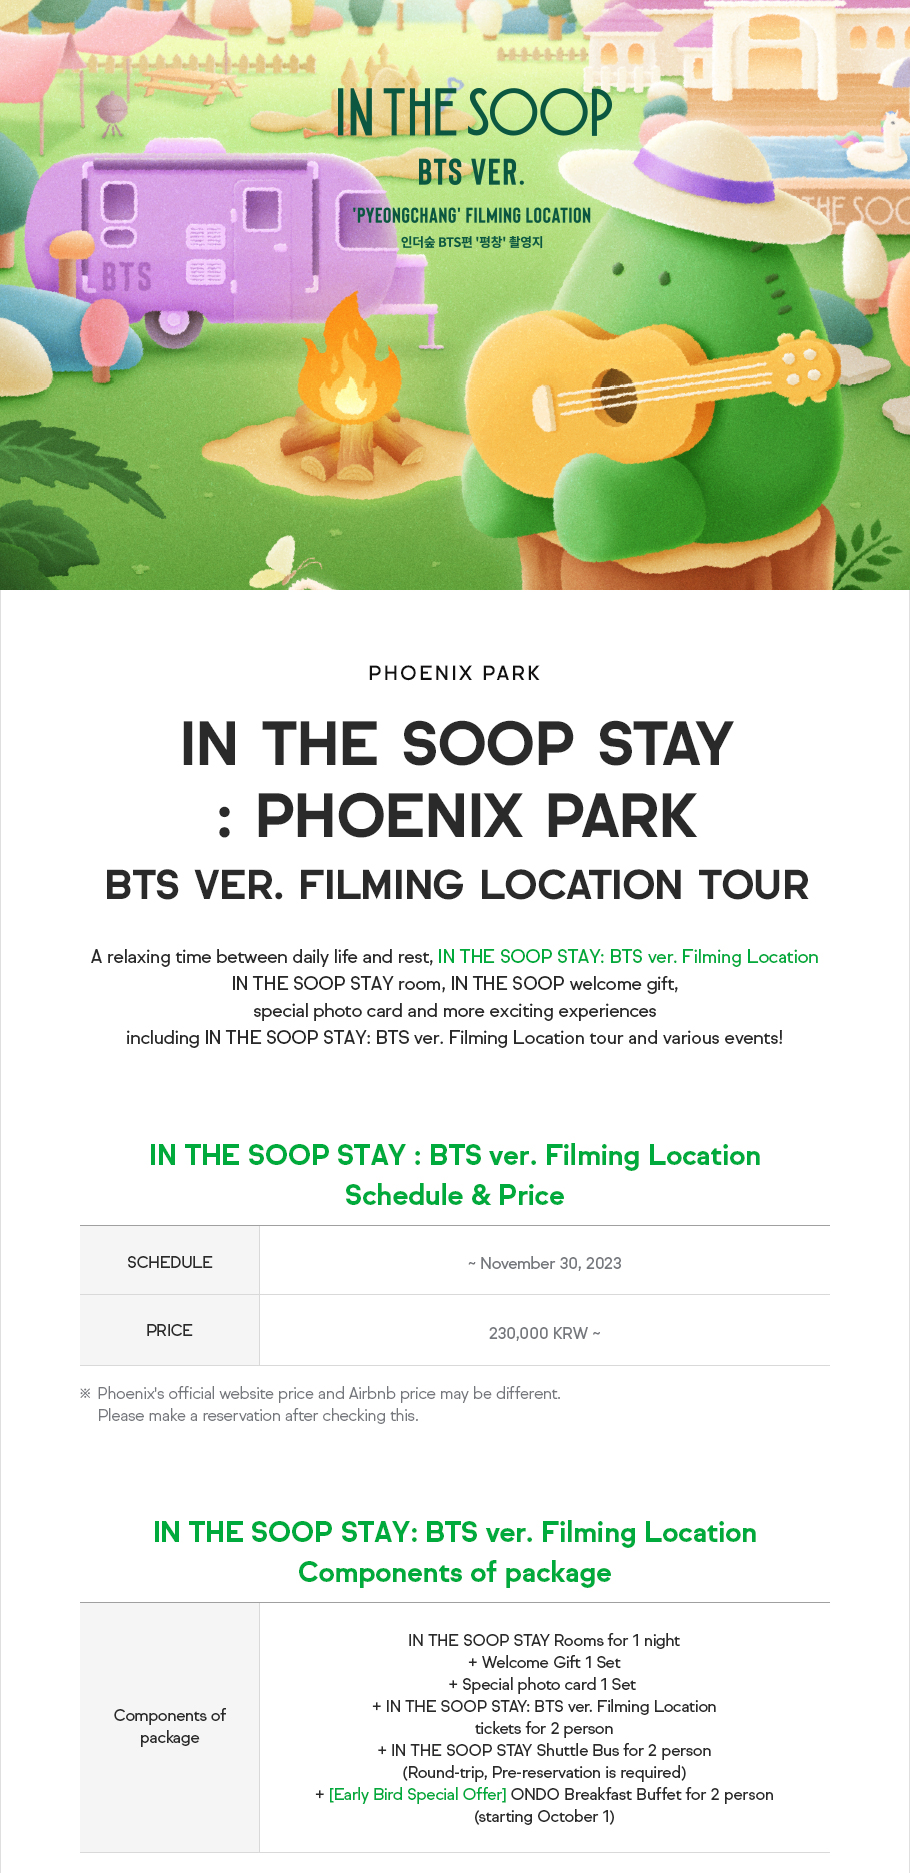 PHOENIX PARK, IN THE SOOP STAY: PHOENIX PARK BTS ver. Filming Location Tour, A relaxing time between daily life and rest, IN THE SOOP STAY: BTS ver. Filming Location IN THE SOOP STAY room, IN THE SOOP welcome gift, special photo card and more exciting experiences including IN THE SOOP STAY: BTS ver. Filming Location tour and various events! IN THE SOOP STAY : BTS ver. Filming Location Schedule & Price. SCHEDULE: ~ November 30, 2023, PRICE: 230,000 KRW ~, PHOENIX's official website price and Airbnb price may be different. Please make a reservation after checking this. IN THE SOOP STAY: BTS ver. Filming Location Components of package. IN THE SOOP STAY Rooms for 1 night + Welcome Gift 1 Set + Special photo card 1 Set + IN THE SOOP STAY: BTS ver. Filming Location tickets for 2 person + IN THE SOOP STAY Shuttle Bus for 2 person(Round-trip, Pre-reservation is required) + [Early Bird Special Offer] ONDO Breakfast Buffet for 2 person(starting October 1)